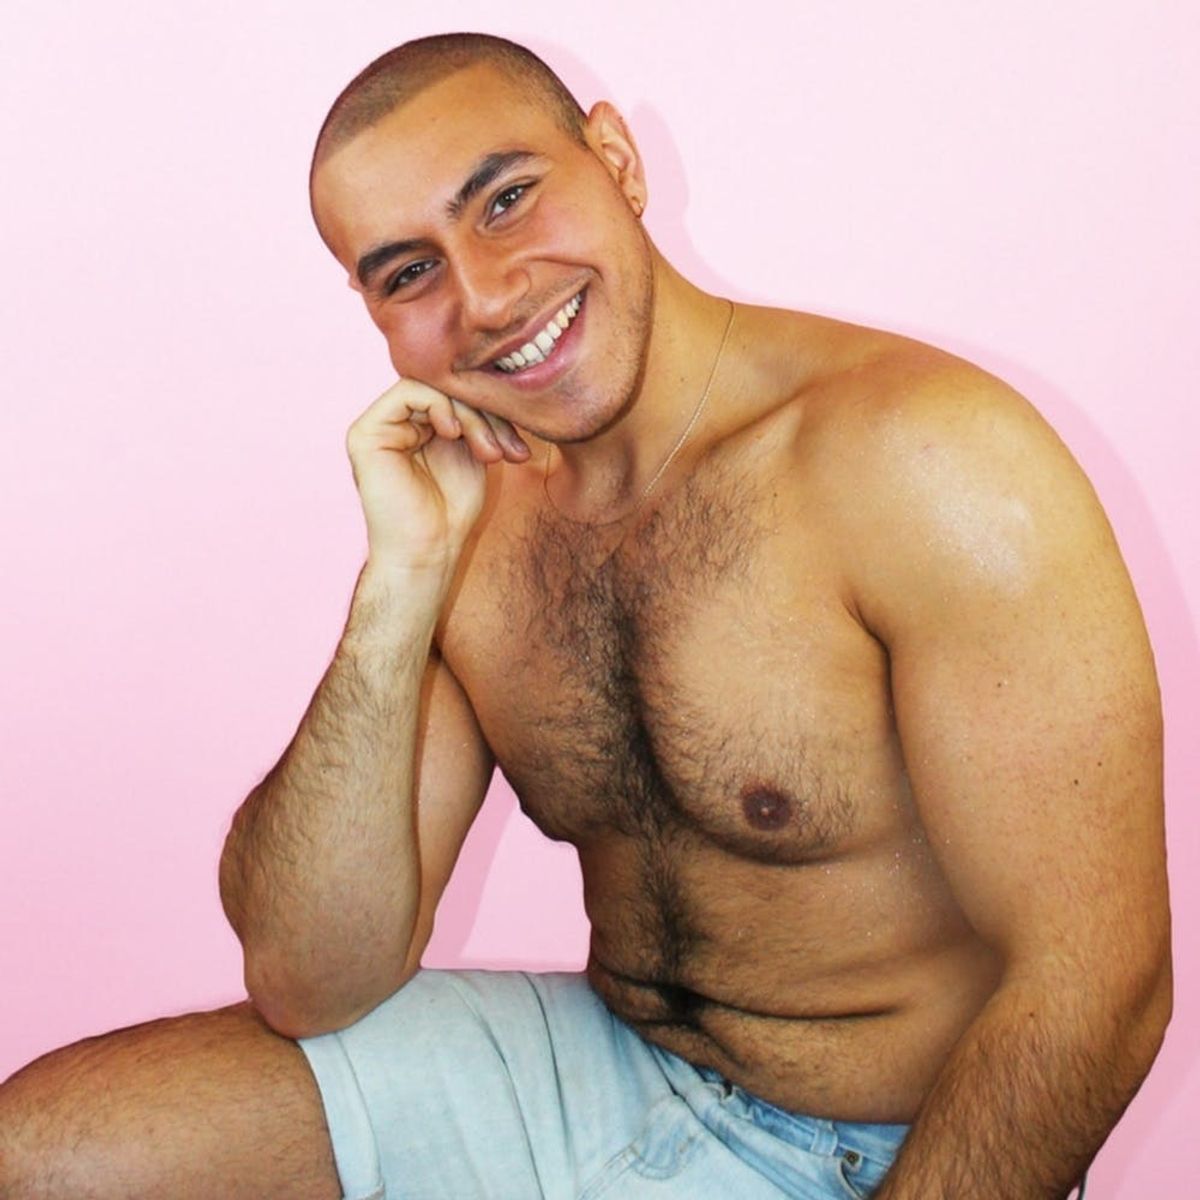 This Instagrammer Reminds Us That Men Deal With Body Image Issues Too